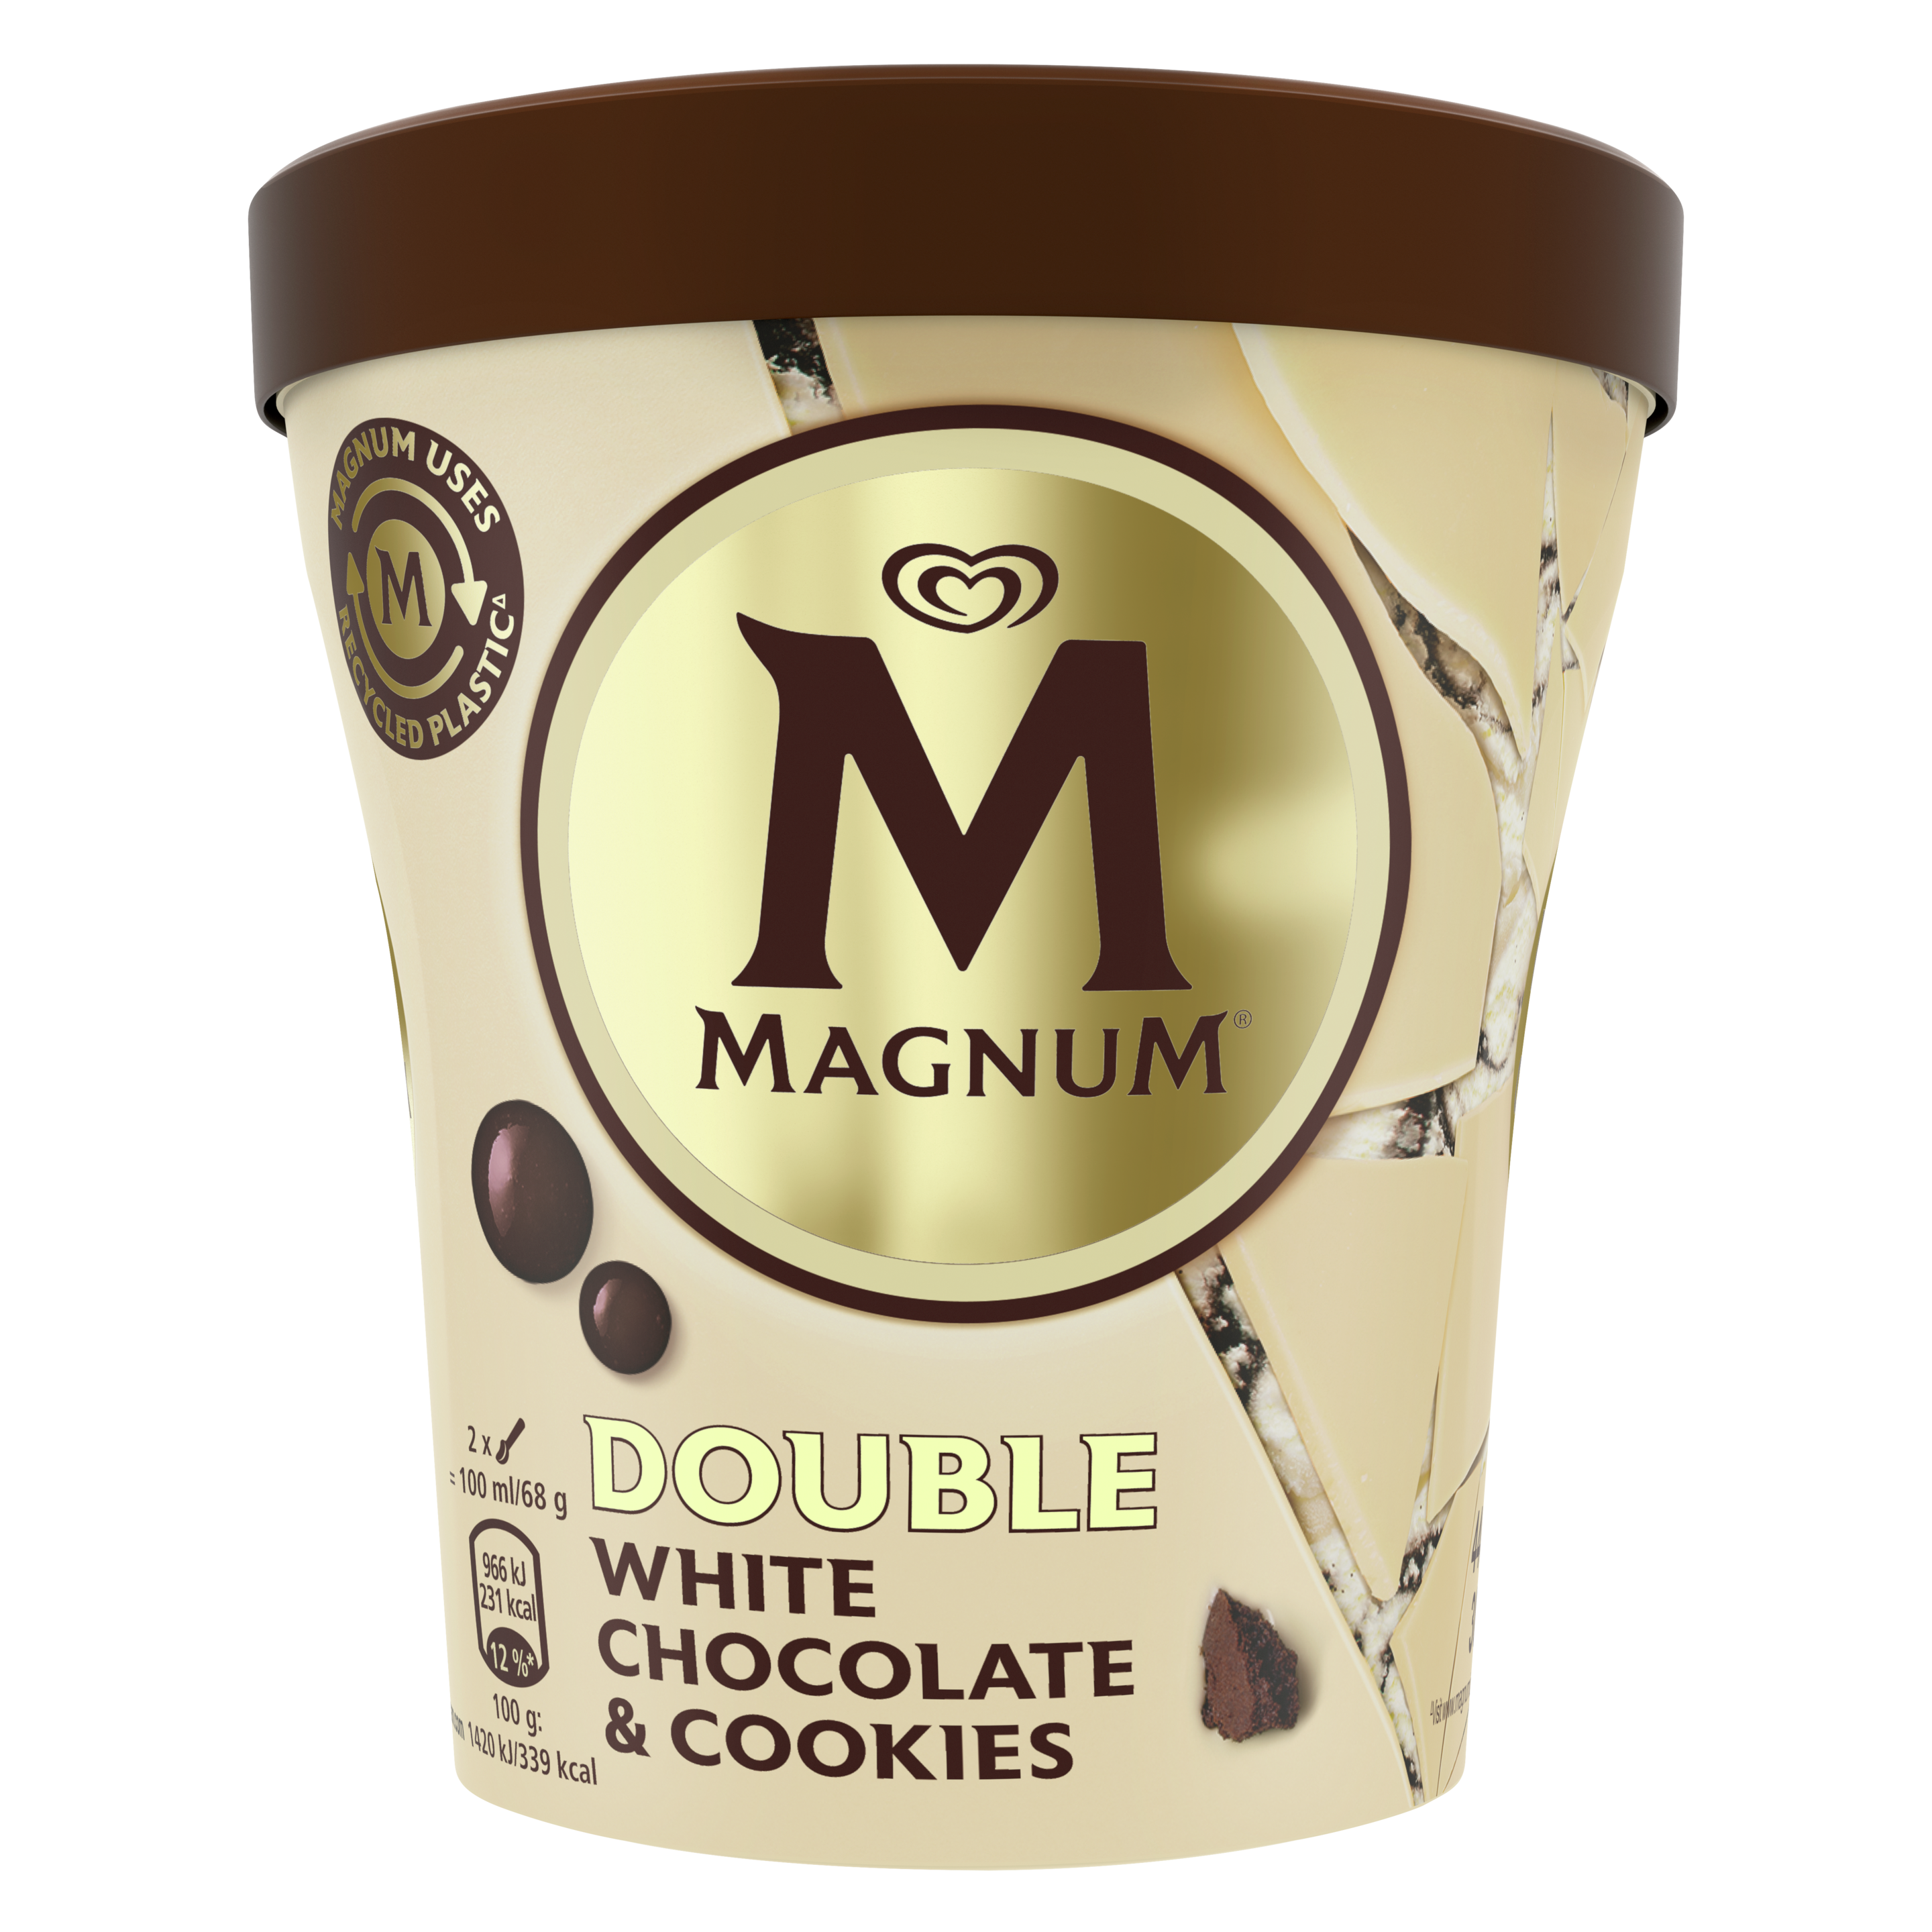 Magnum Double White Chocolate & Cookies